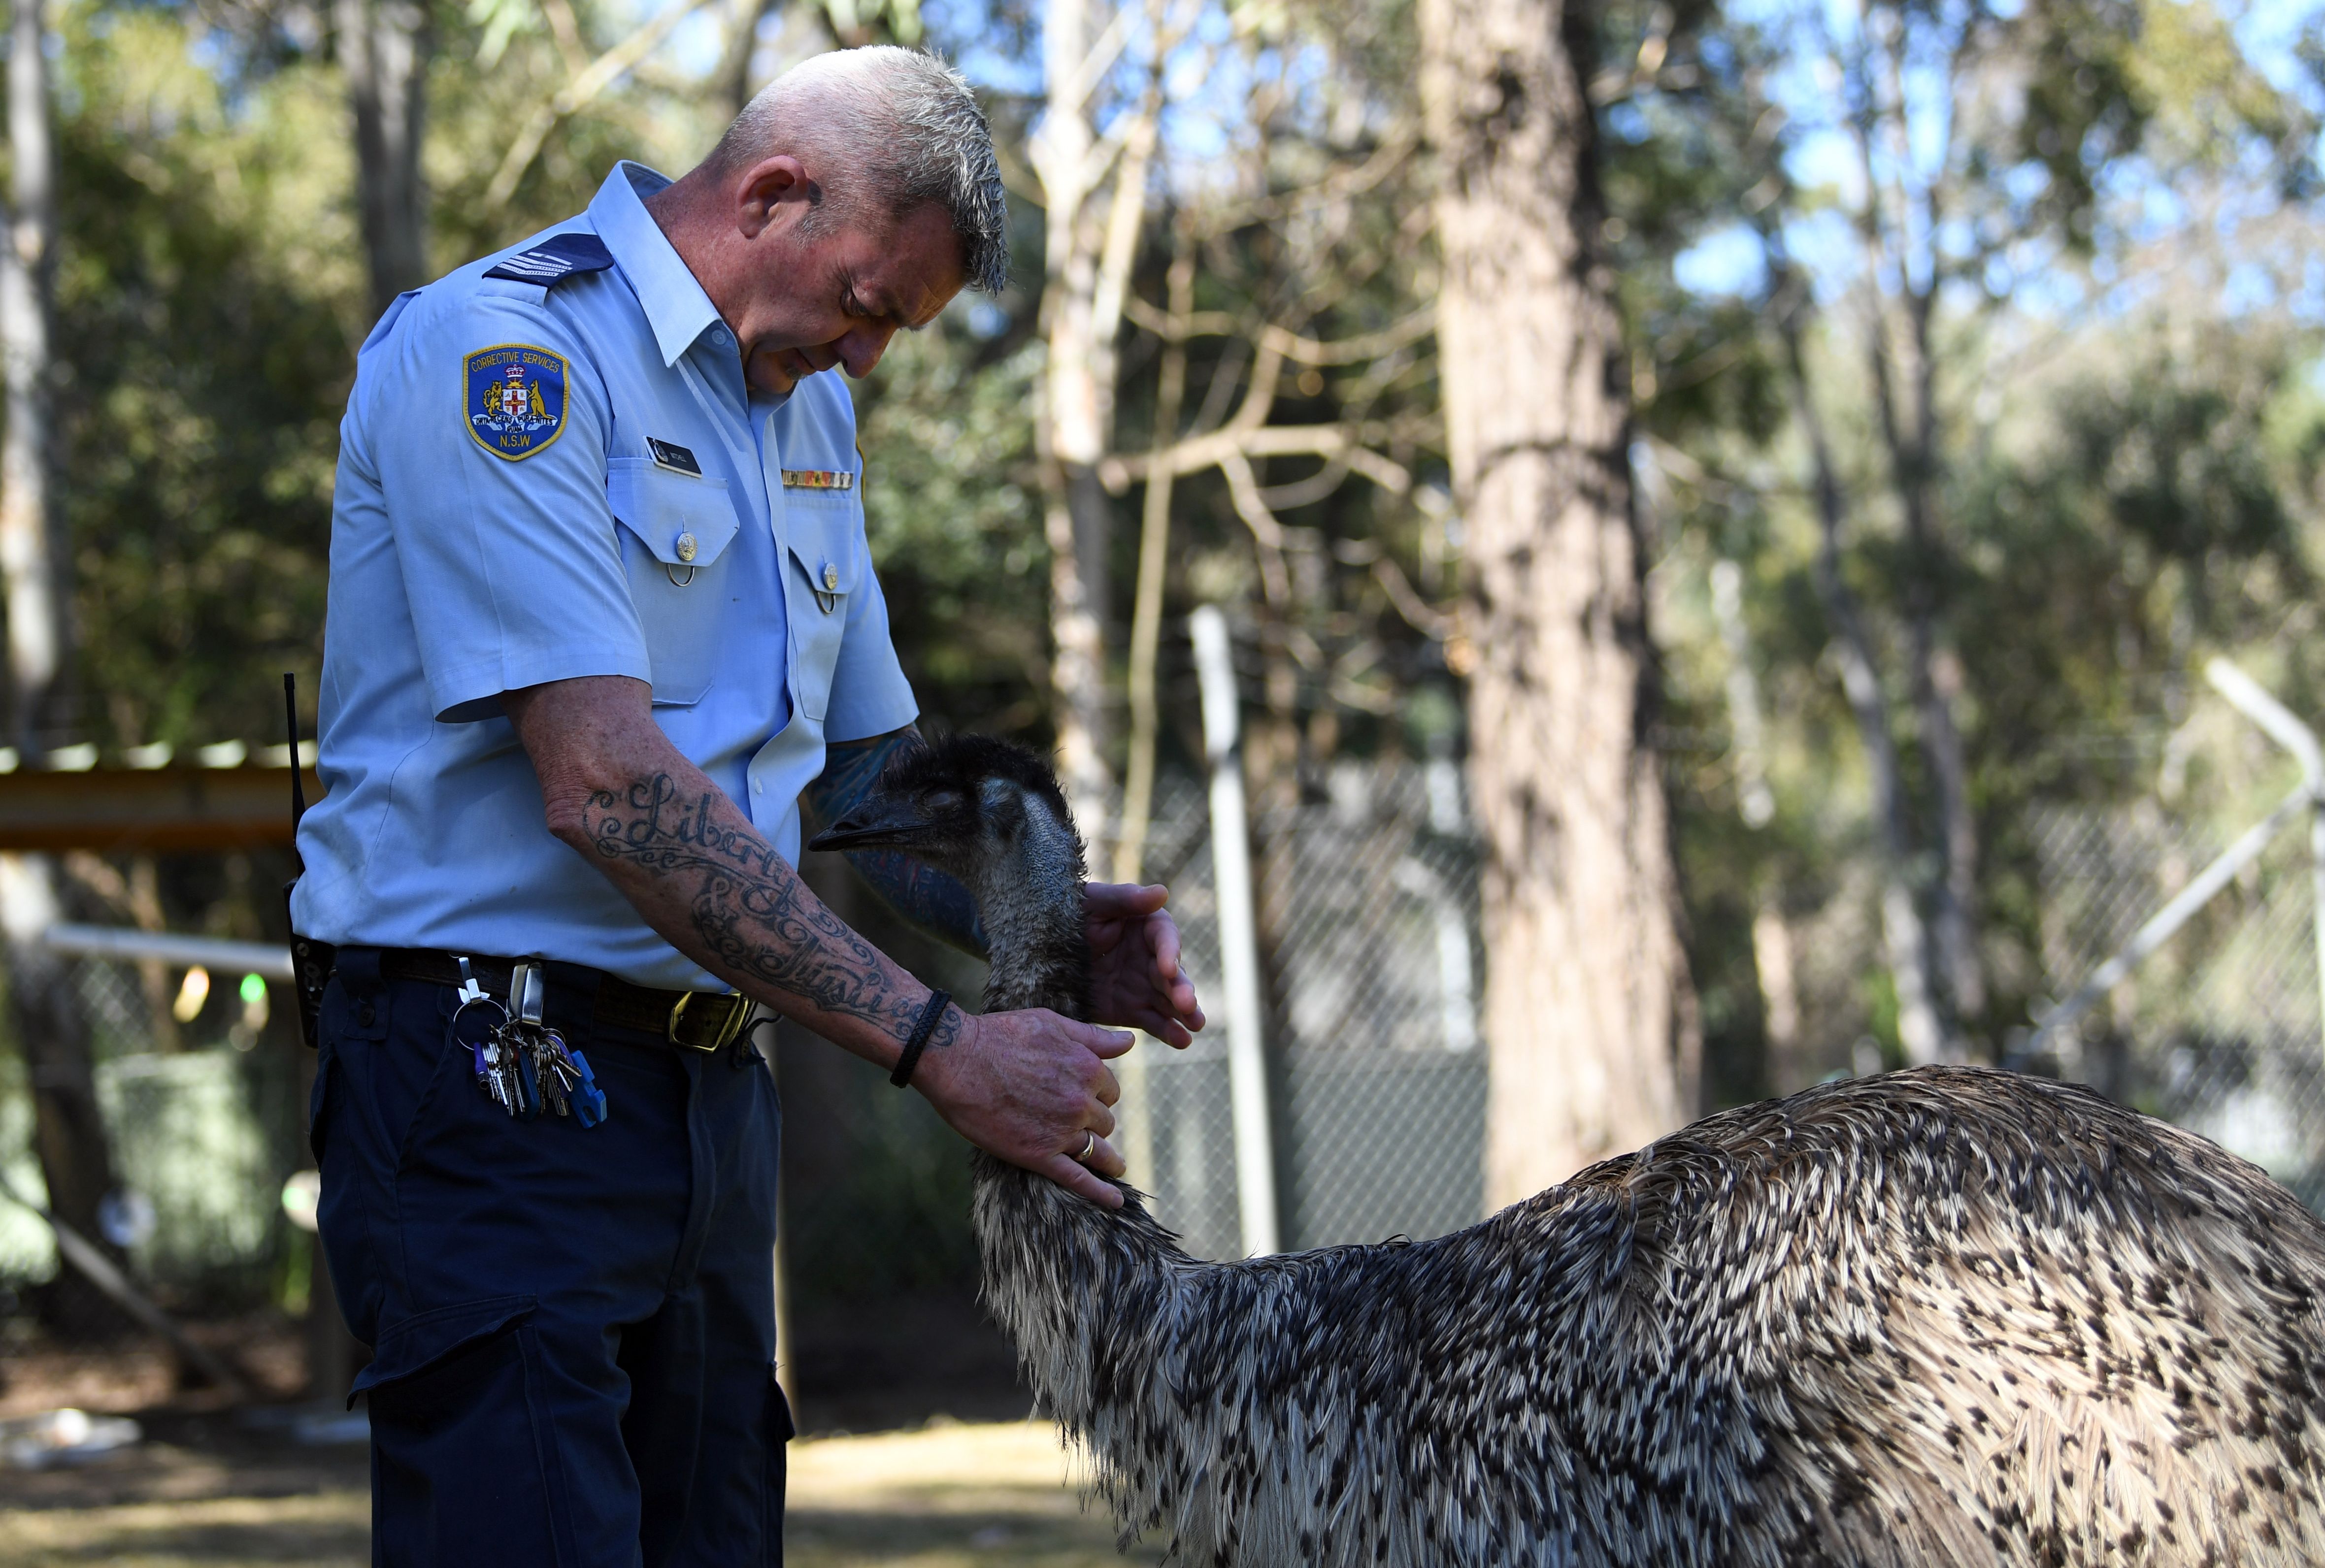 Officer in charge Ian Mitchell handles an emu inside an enclosure at John Morony Correctional Complex Wildlife Centre in Sydney on August 24, 2107. (SAEED KHAN/AFP/Getty Images)